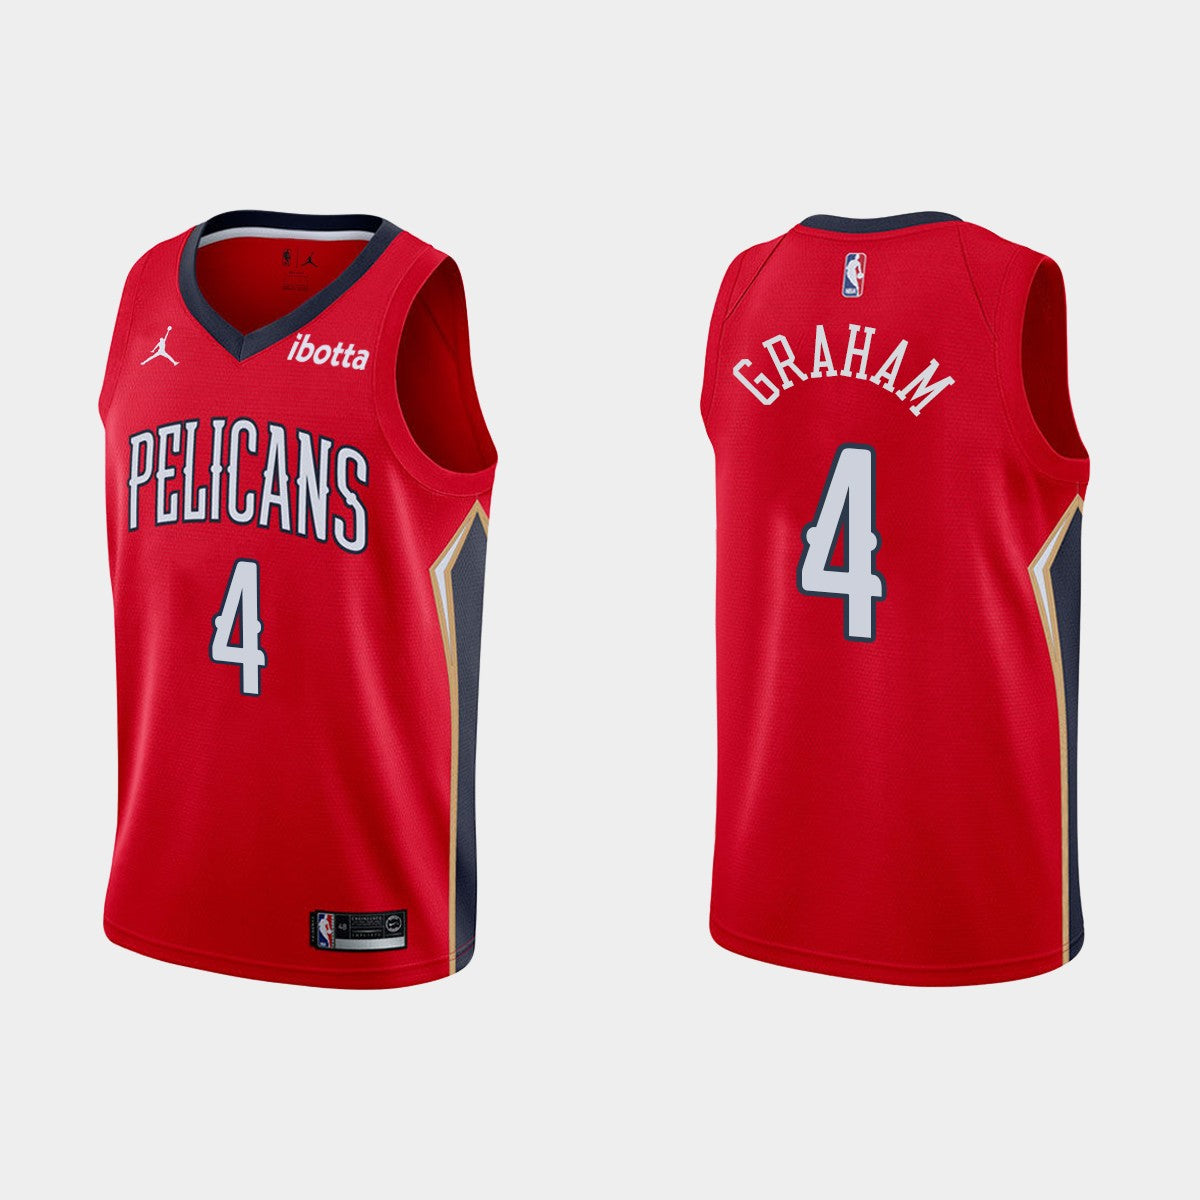 2014-15 New Orleans Pelicans Blank Game Issued Red Jersey 5XL4 711063S